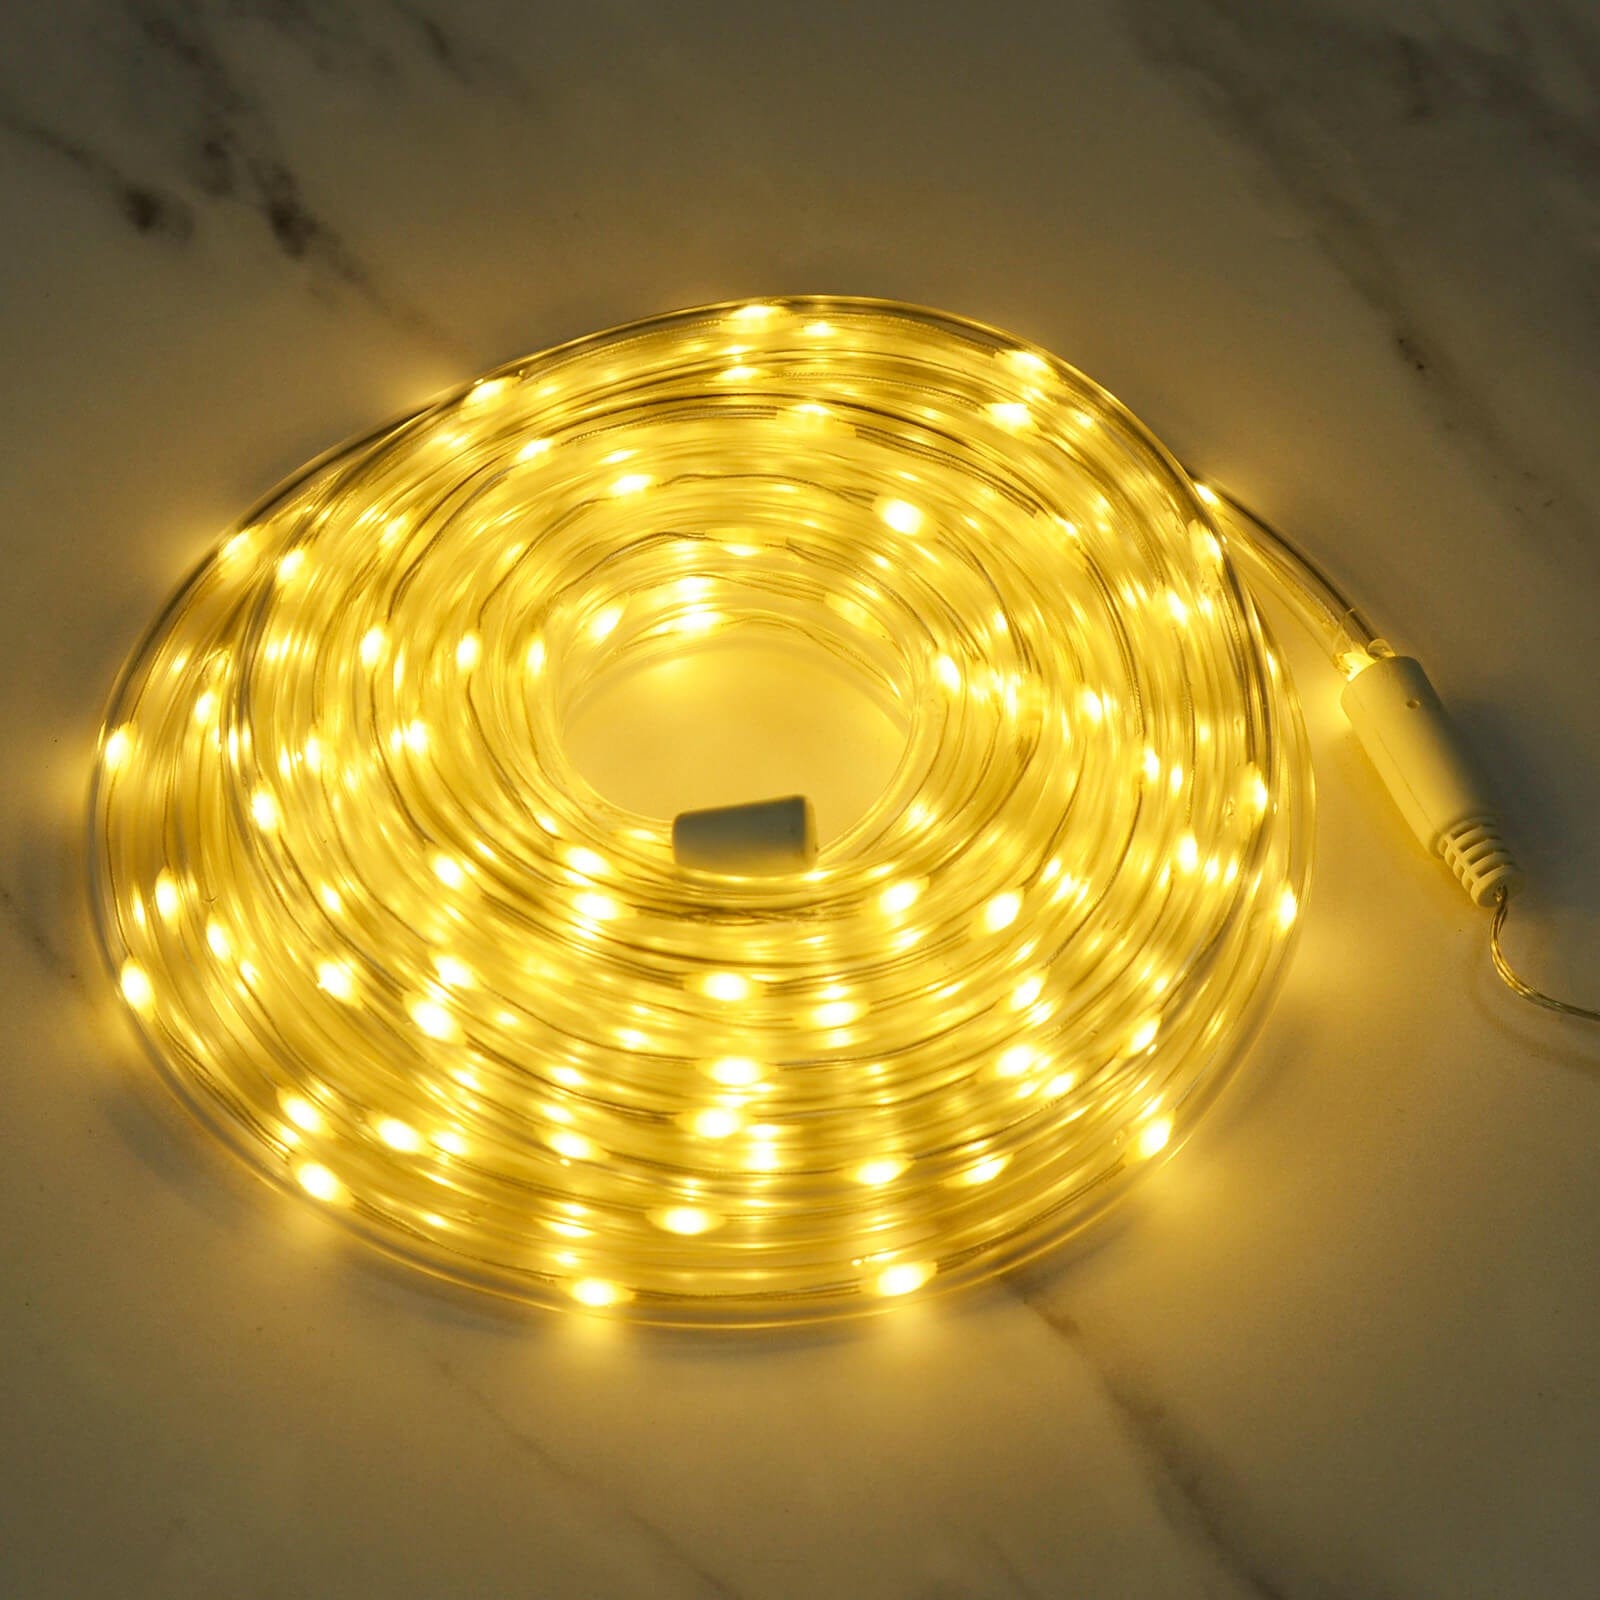 warm white rope light fro Christmas decoration lit up in a coil on a marble floor